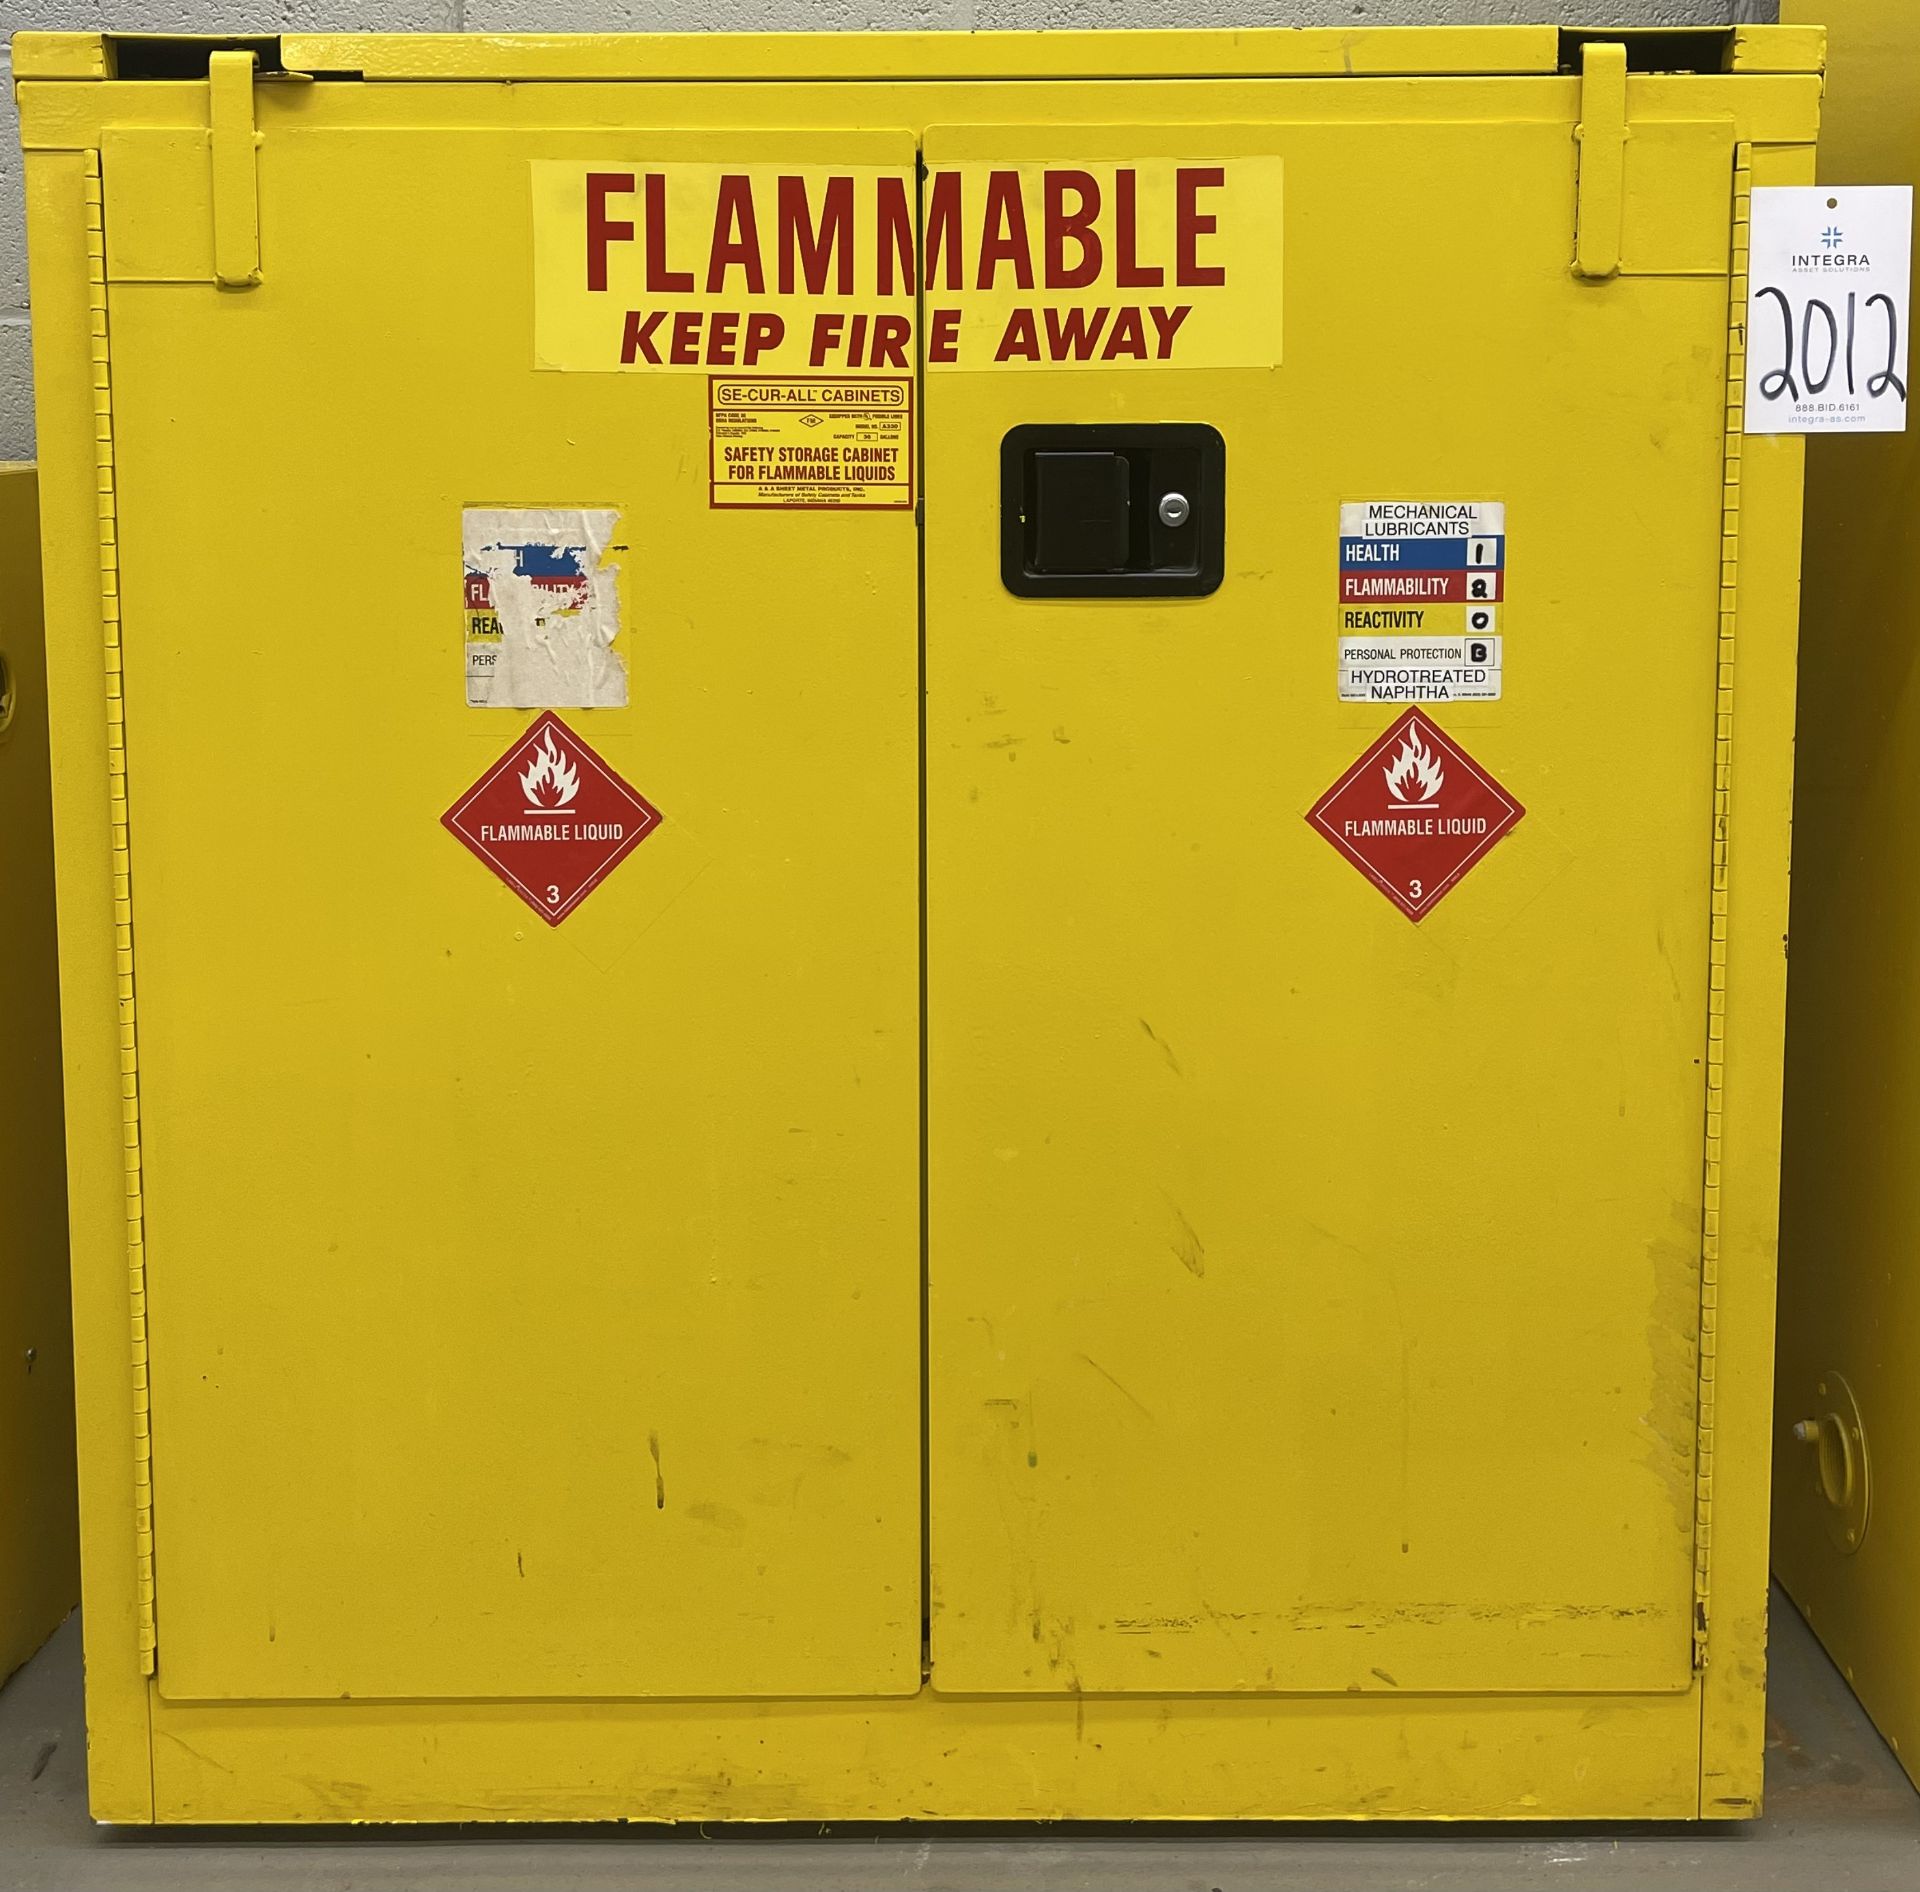 Se-cur-all Flammable Liquids Safety Storage Cabinet